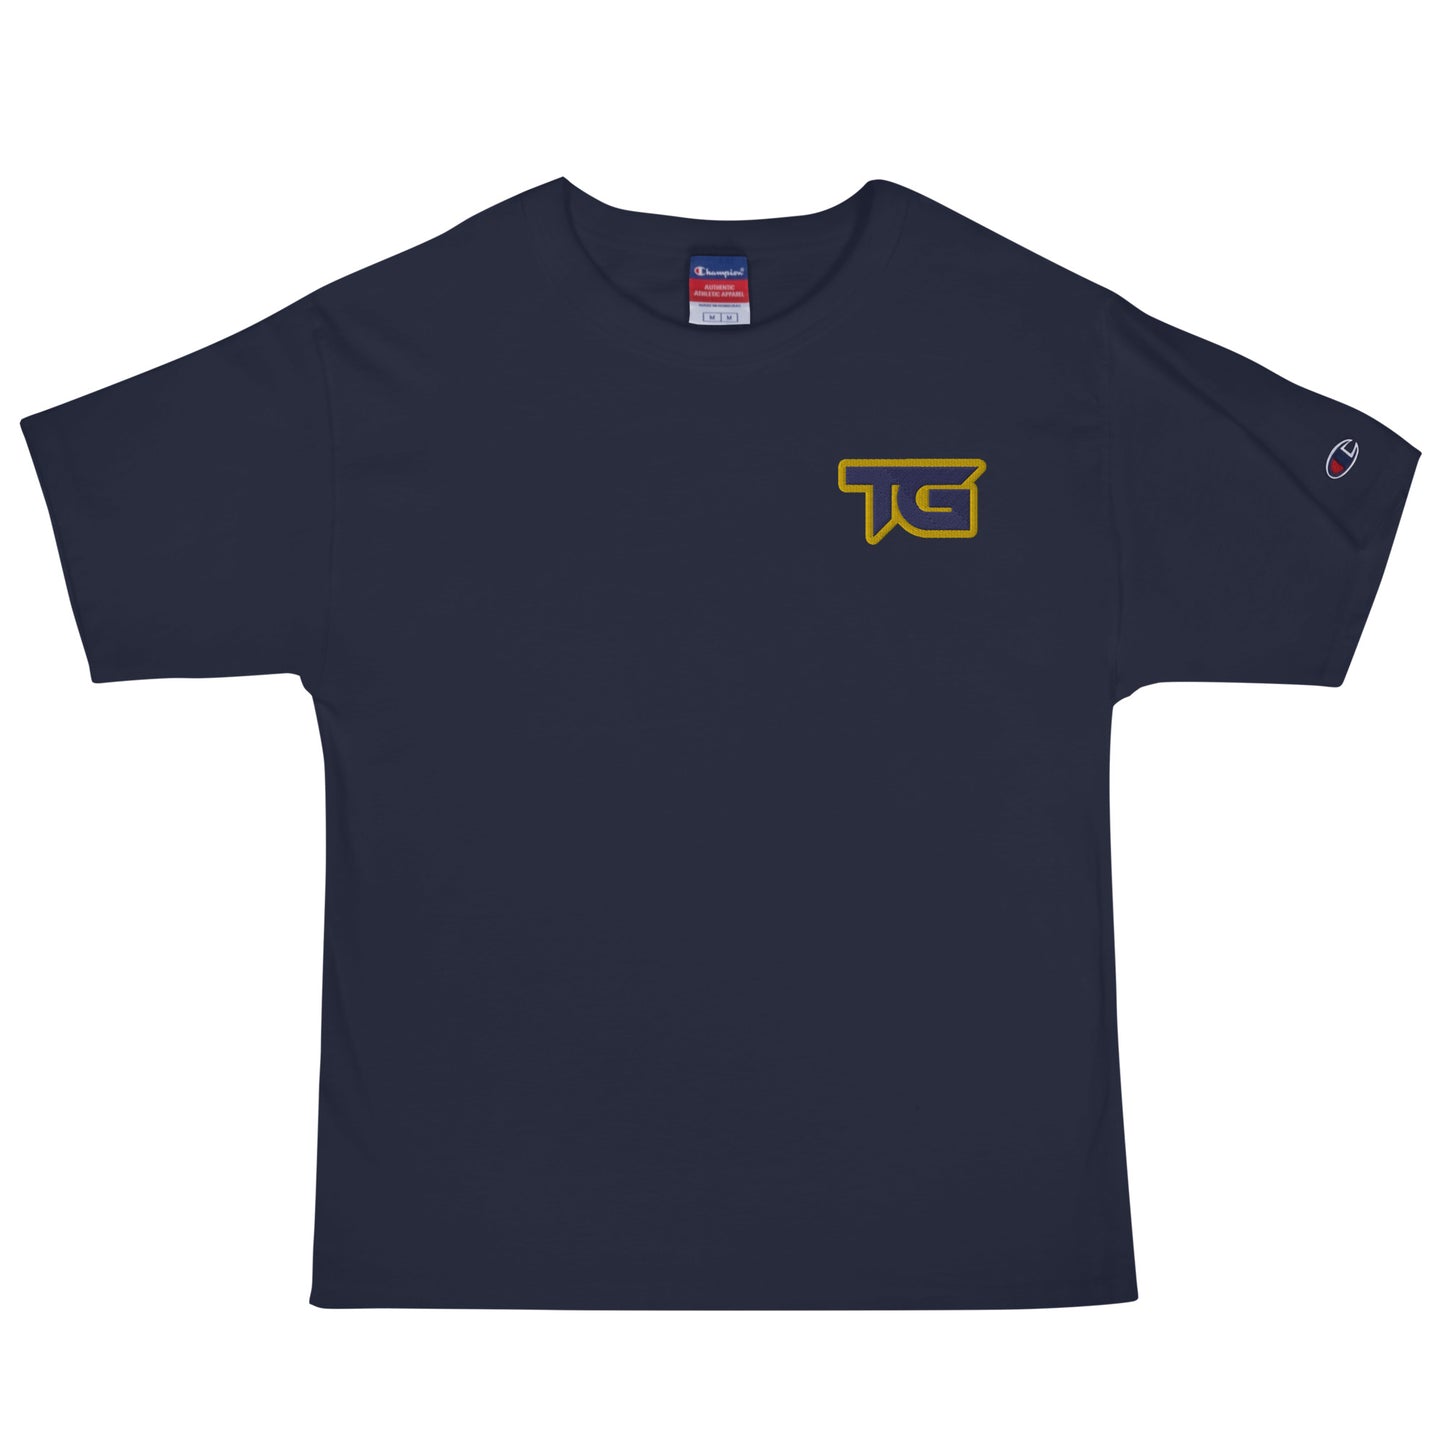 TG Embroidered Men's Champion T-Shirt